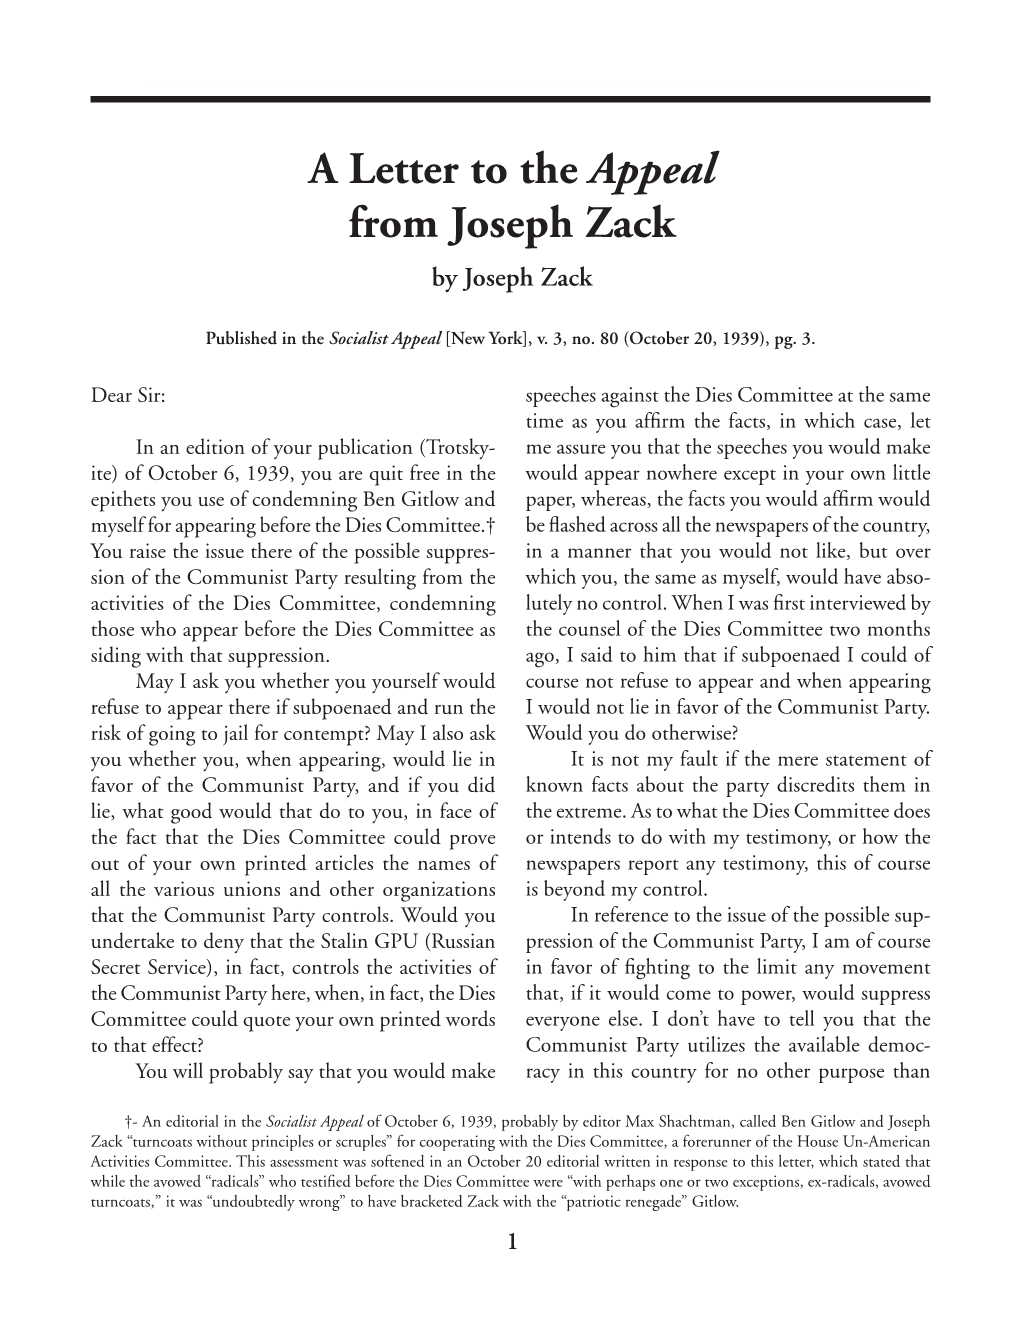 A Letter to the Appeal from Joseph Zack by Joseph Zack